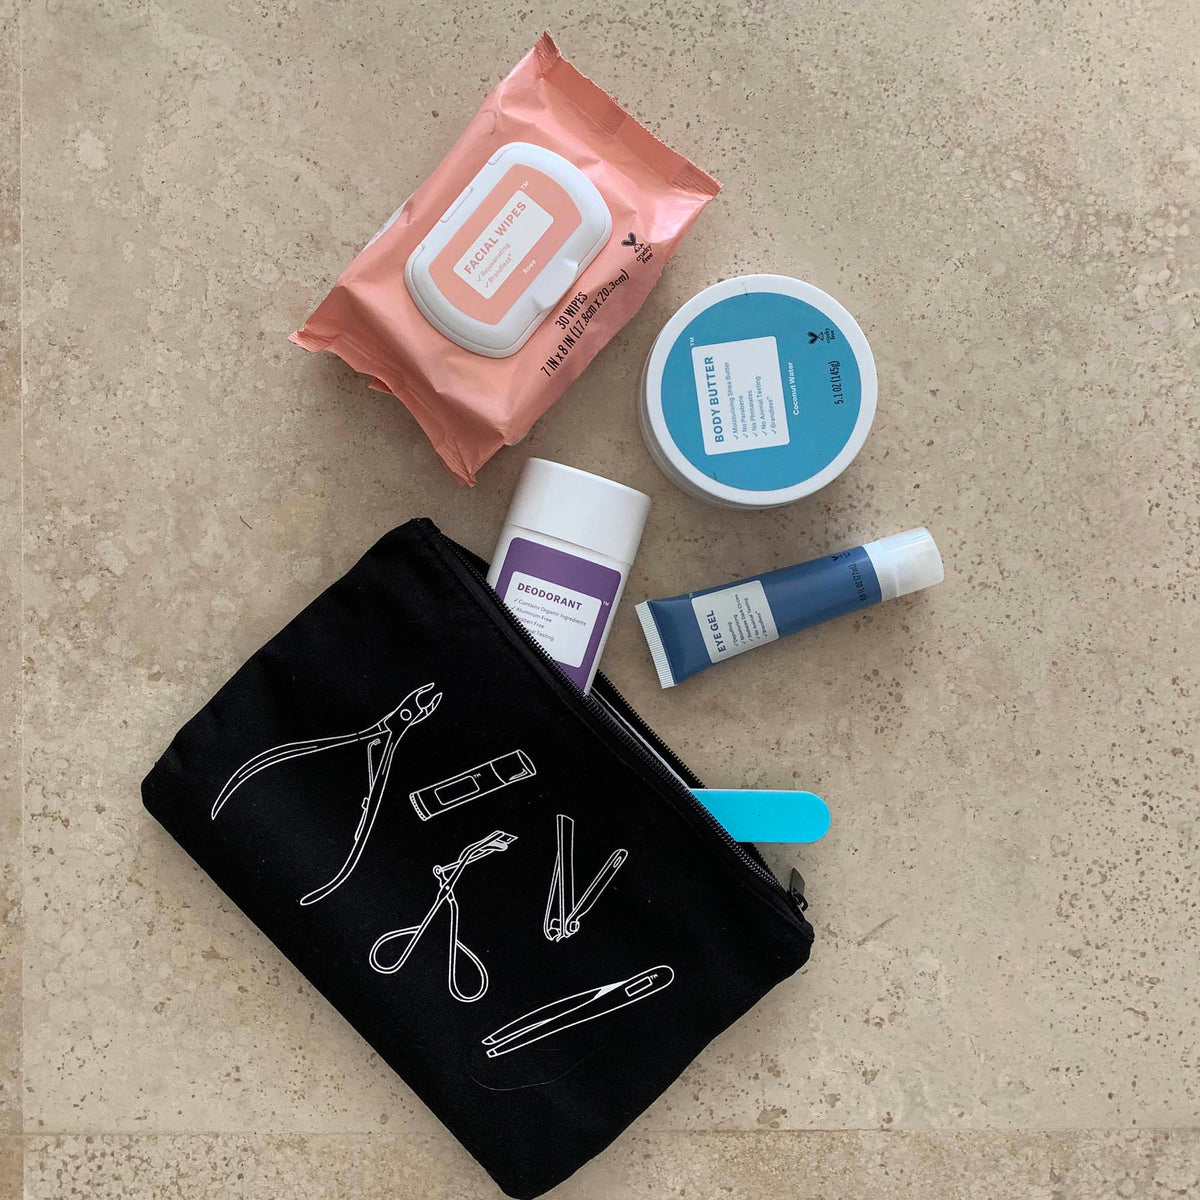 Lifestyle photo, showing the cosmetic bag with several items poking out of it on a bathroom countertop, including makeup removal wipes, body butter, eye gel, deodorant, and an emory board.